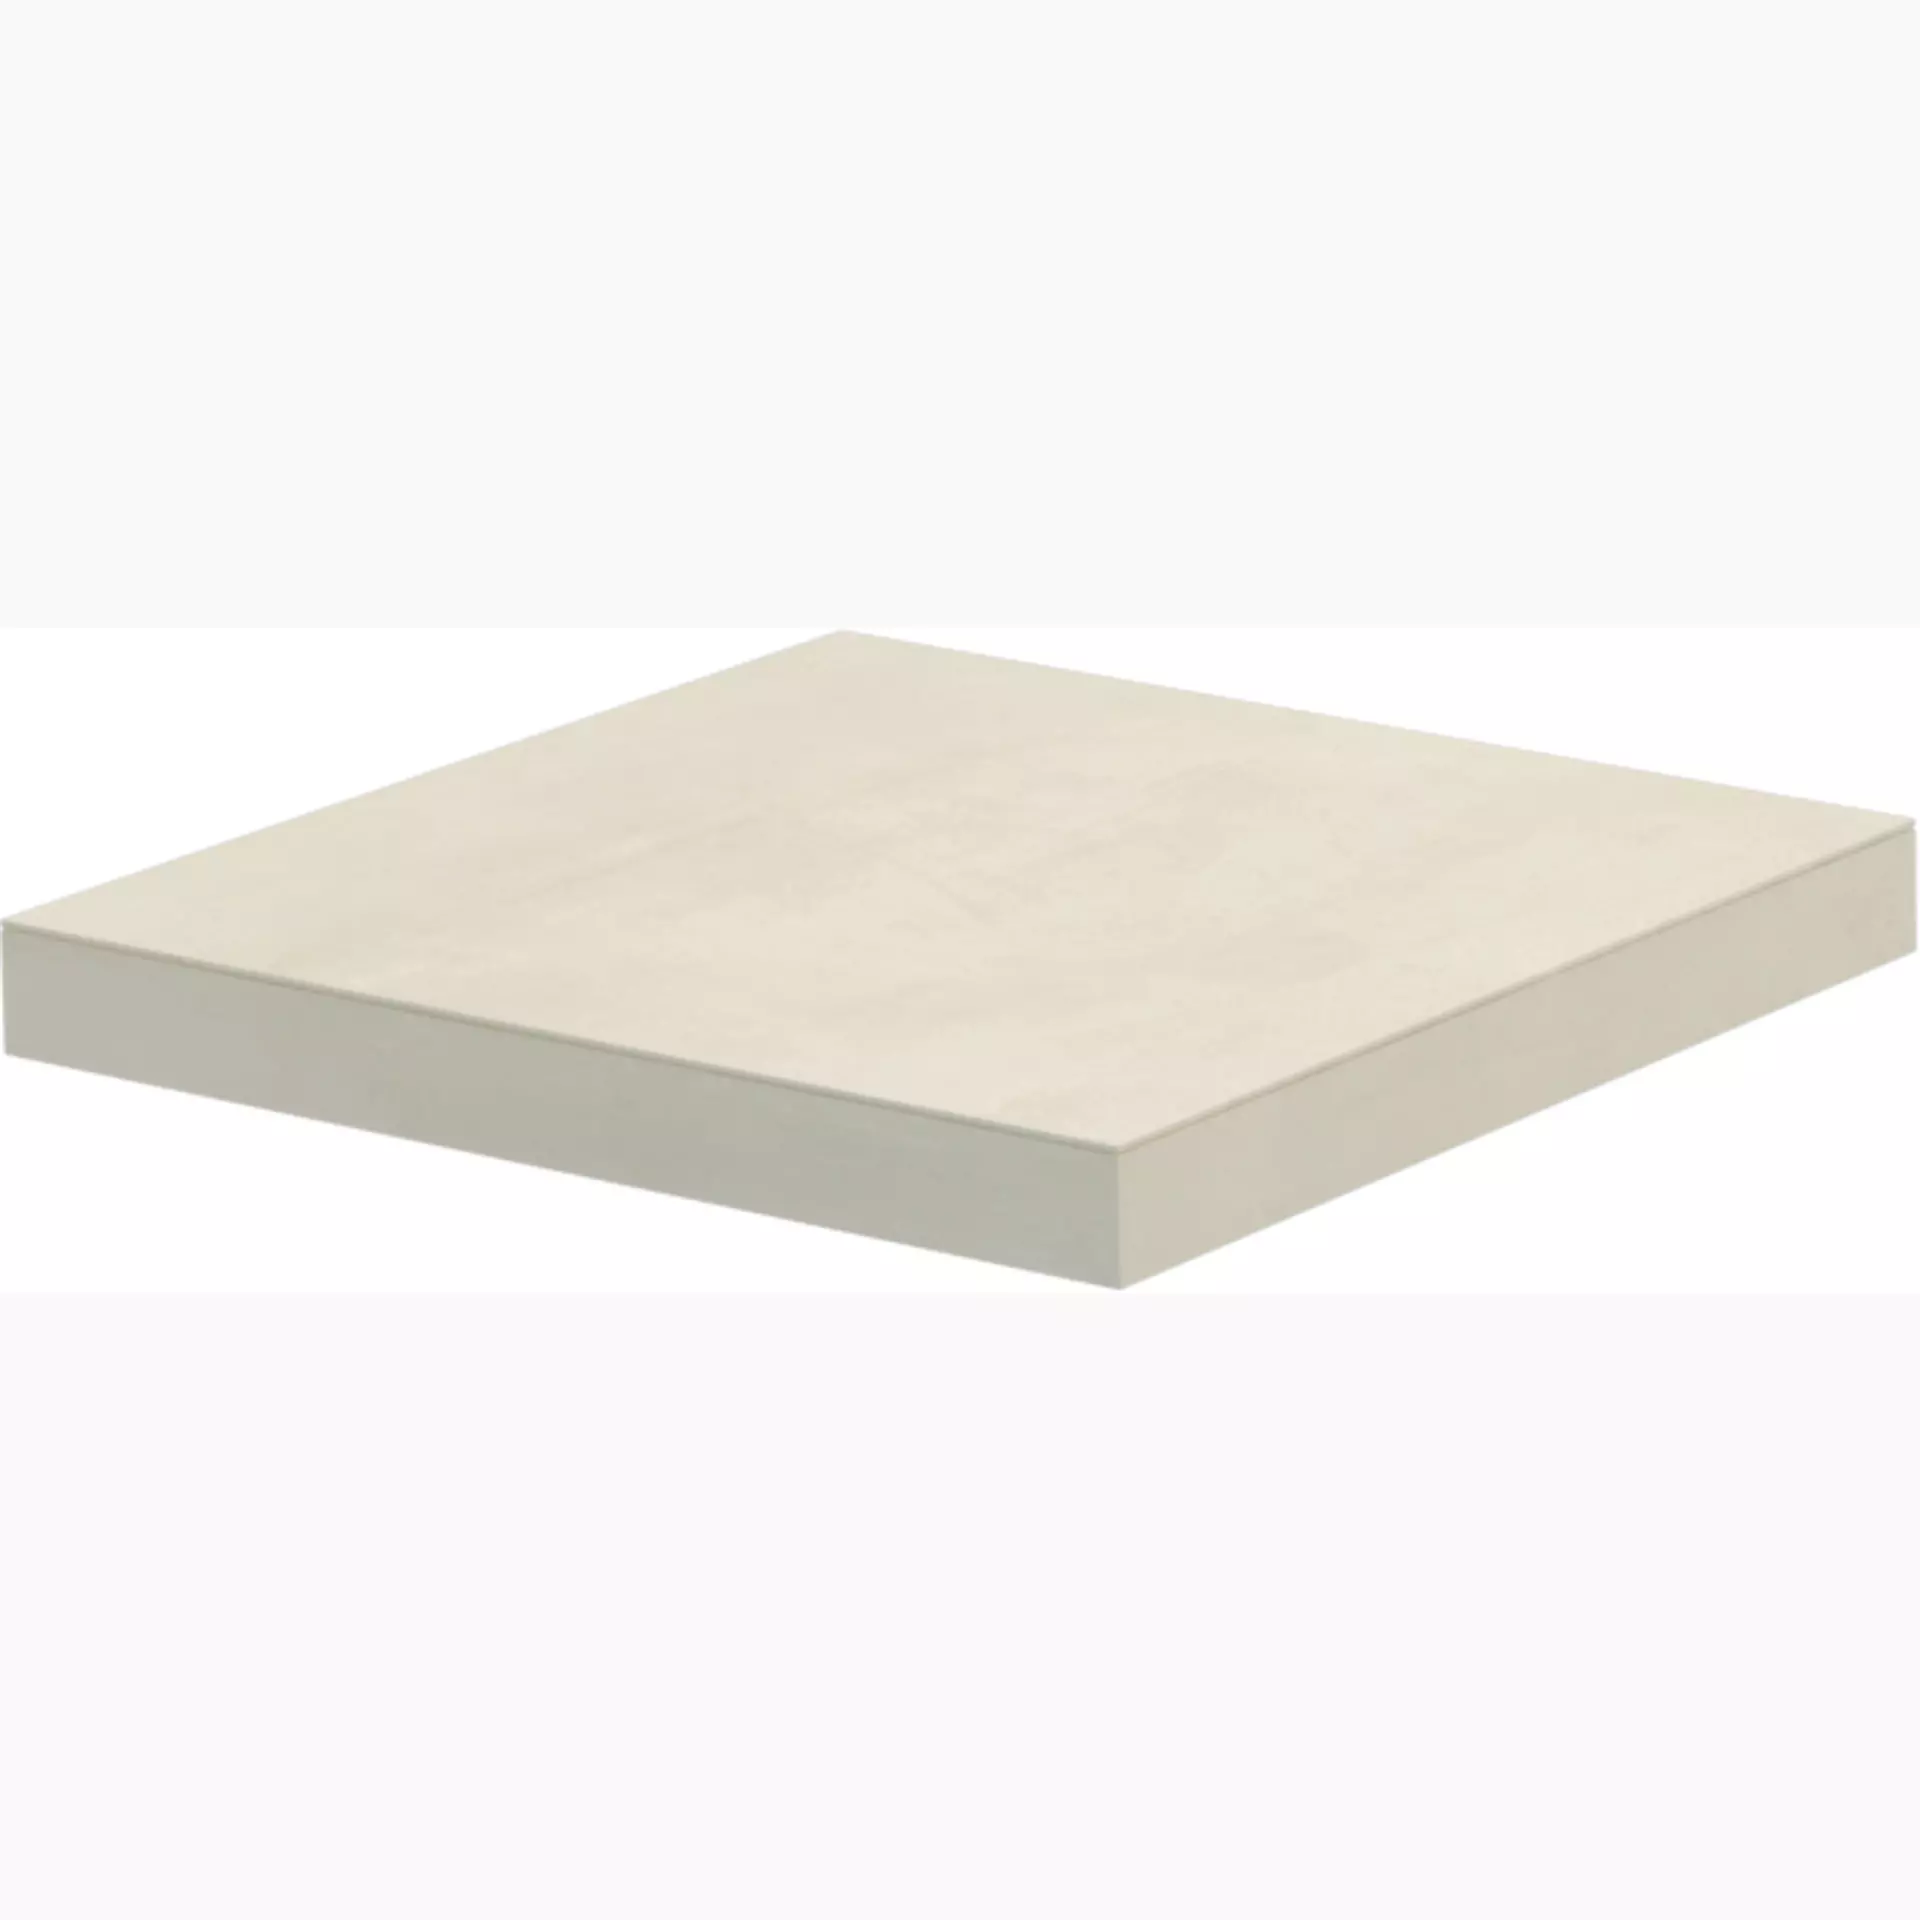 Del Conca Timeline White Htl10 Naturale Corner plate Step Right G3TL10RGD 33x33cm rectified 8,5mm